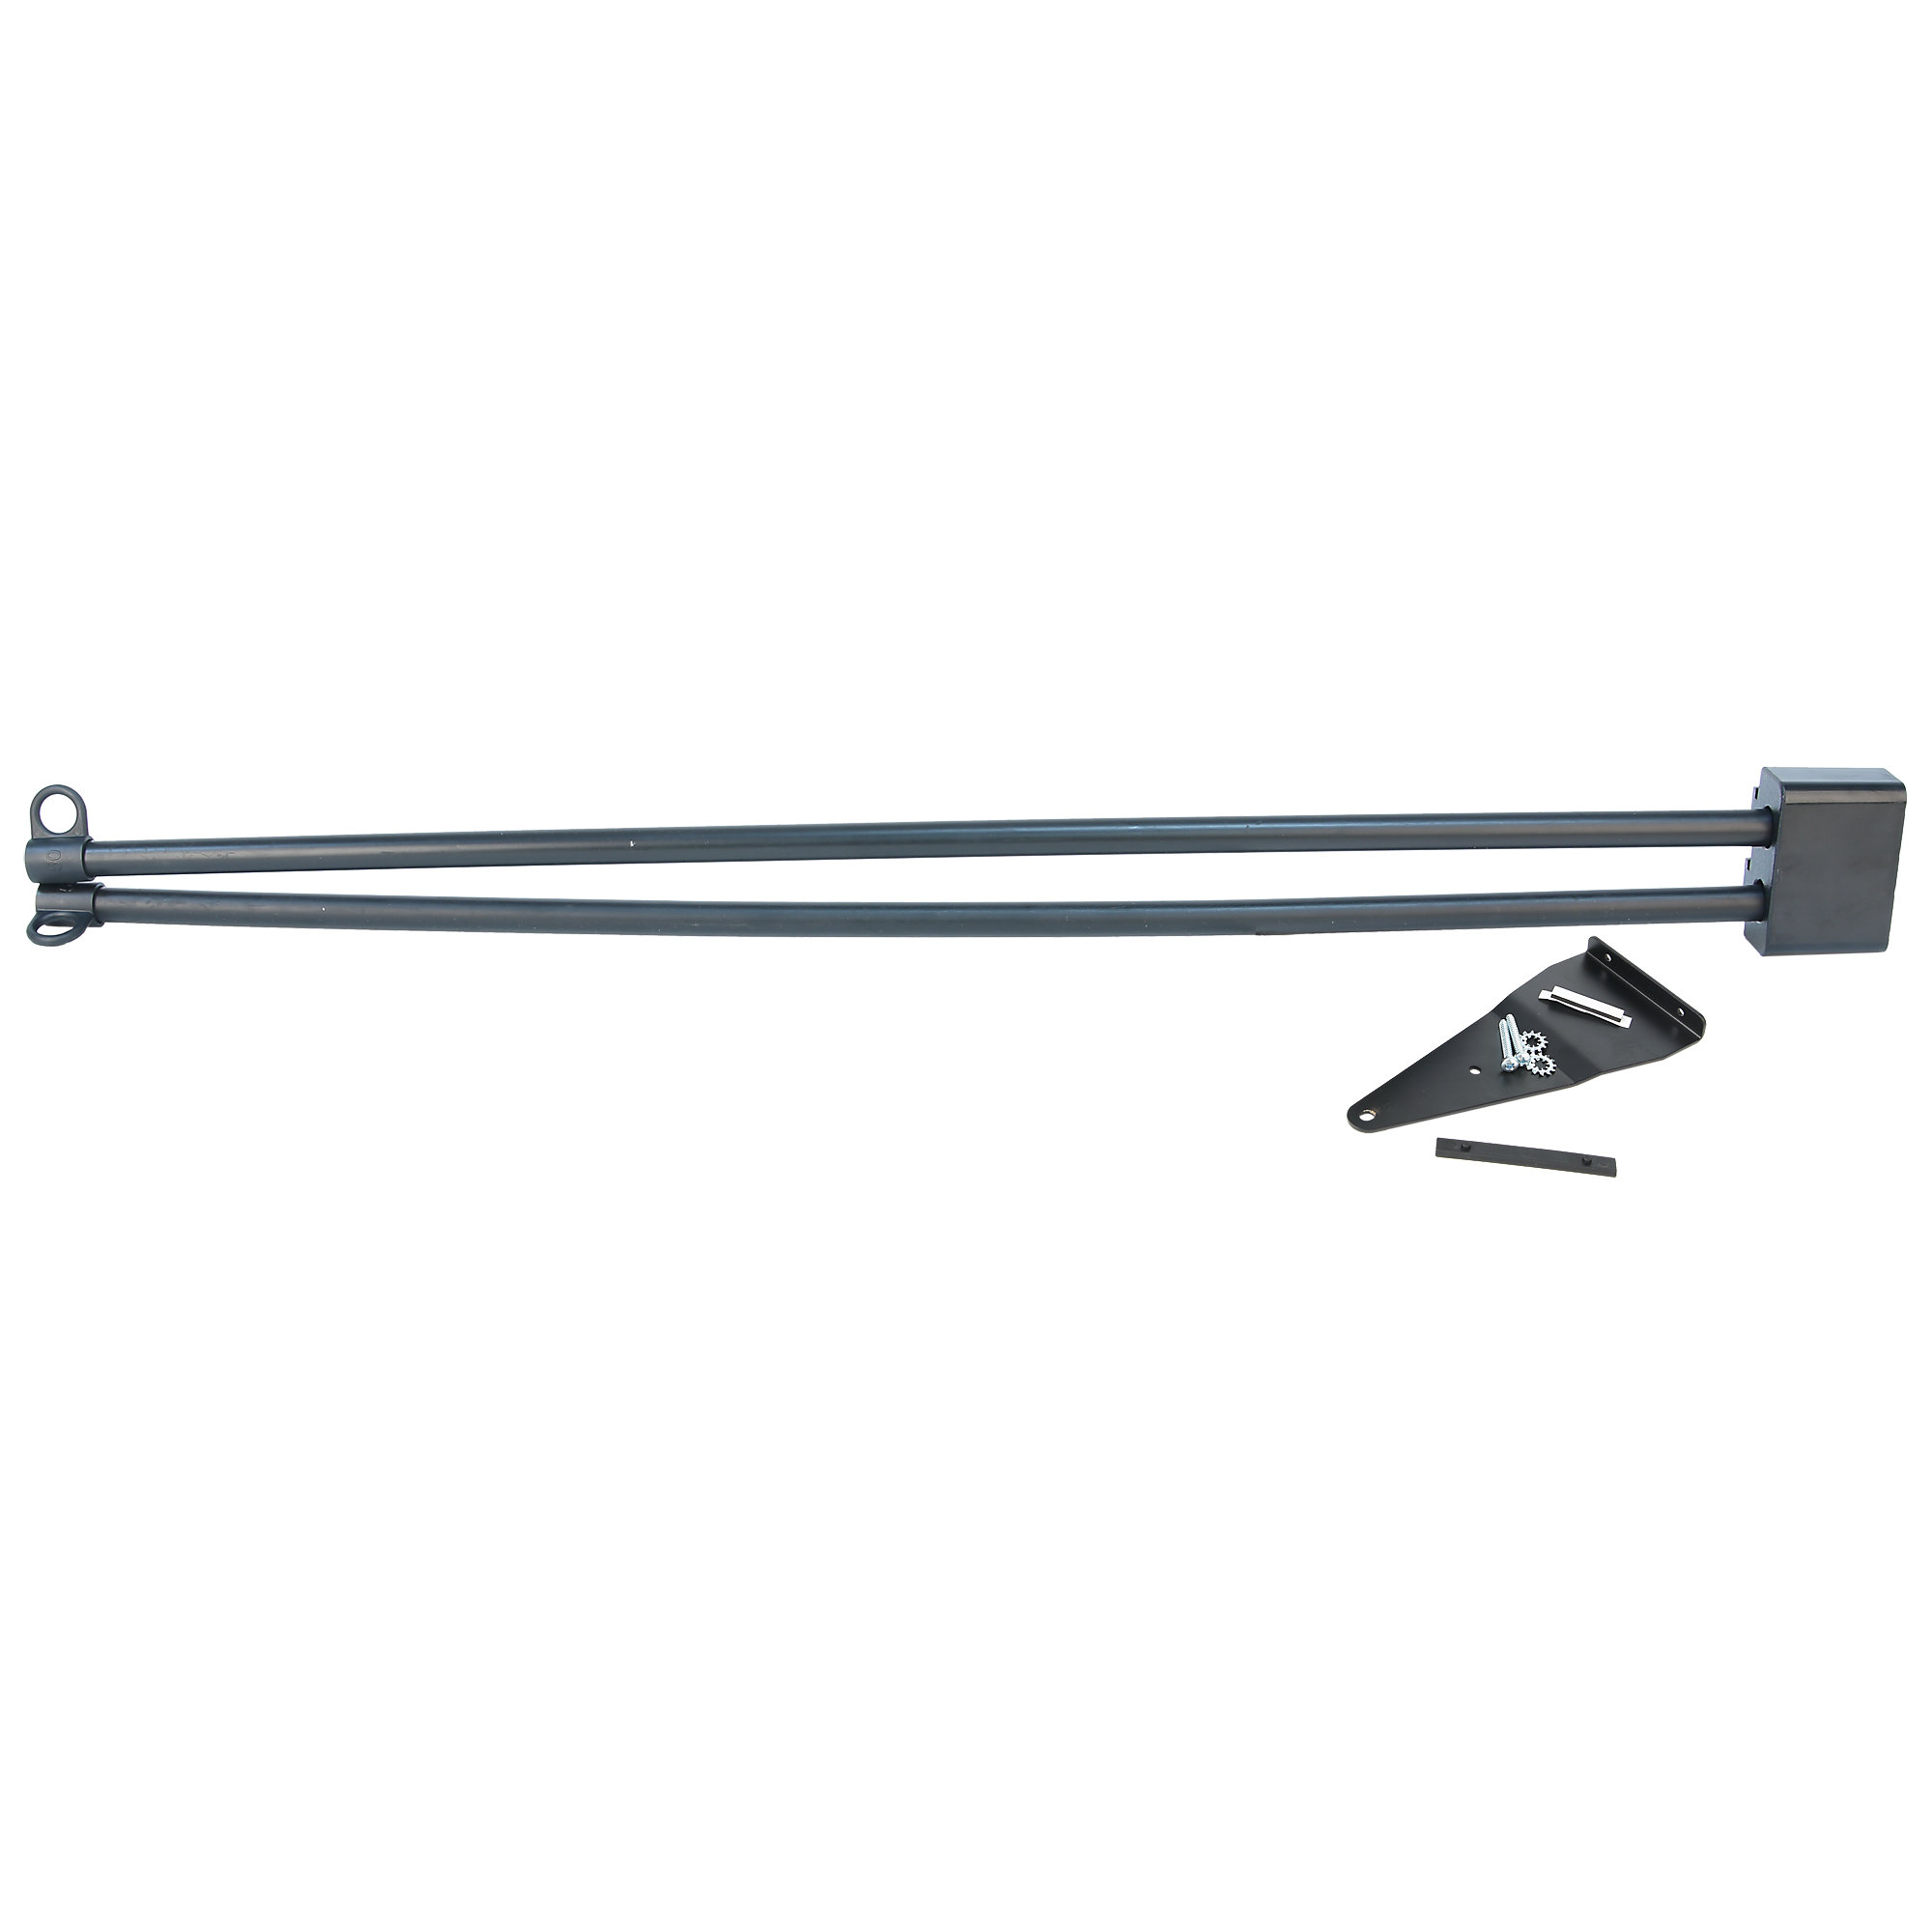 410lb Rod Upgrade Kit for certain Bowflex Home Gyms from 310lbs to 410lbs